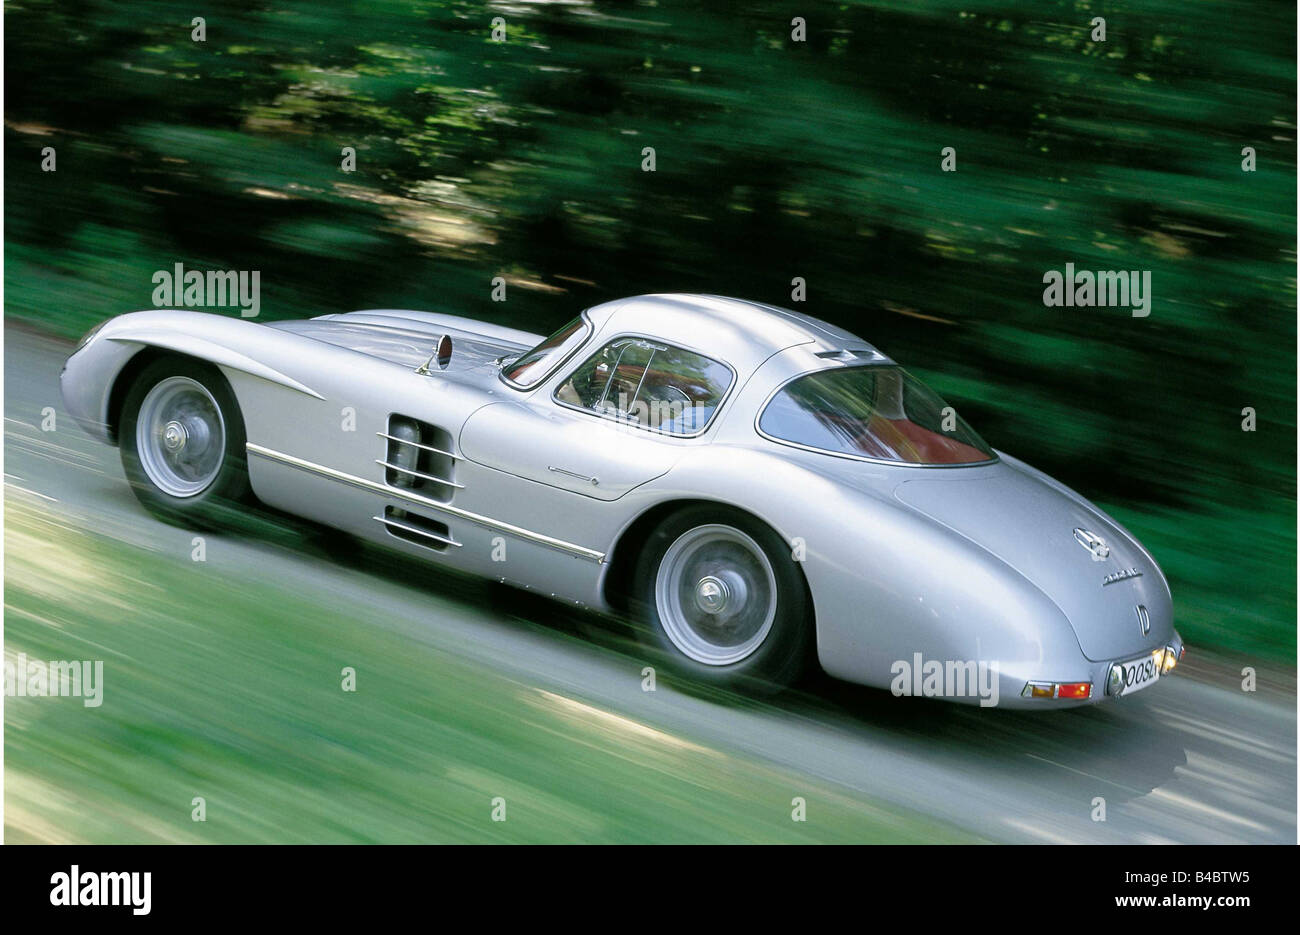 Car, Mercedes 300 SLR, Sports approx.s coupé, model year 1955, 'Uhlenhaut-coupe', Double doors, diagonal from the back, driving, Stock Photo